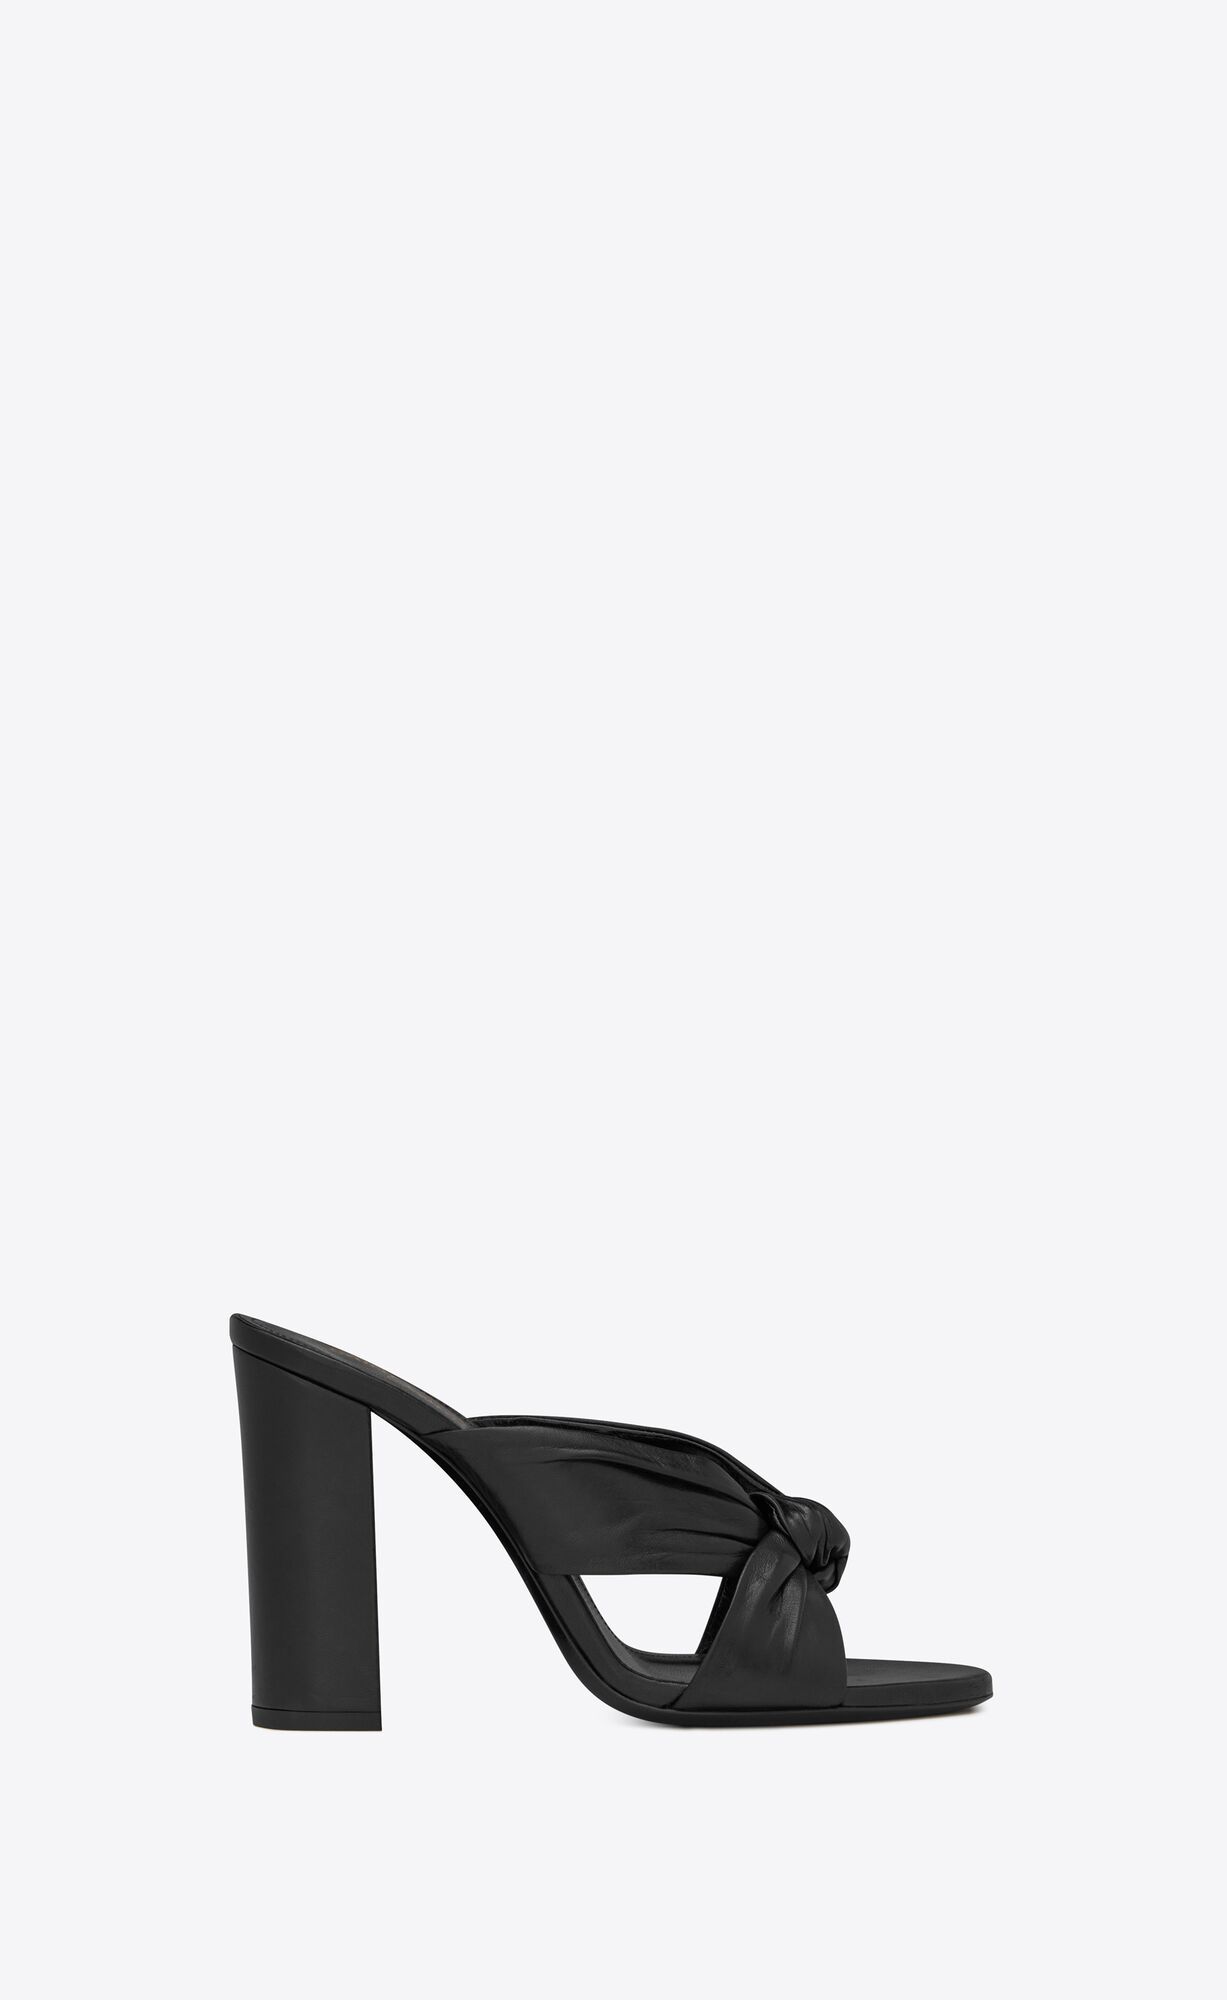 Mules with crisscrossed front tied in a knot, featuring a round toe and a covered block heel. | Saint Laurent Inc. (Global)